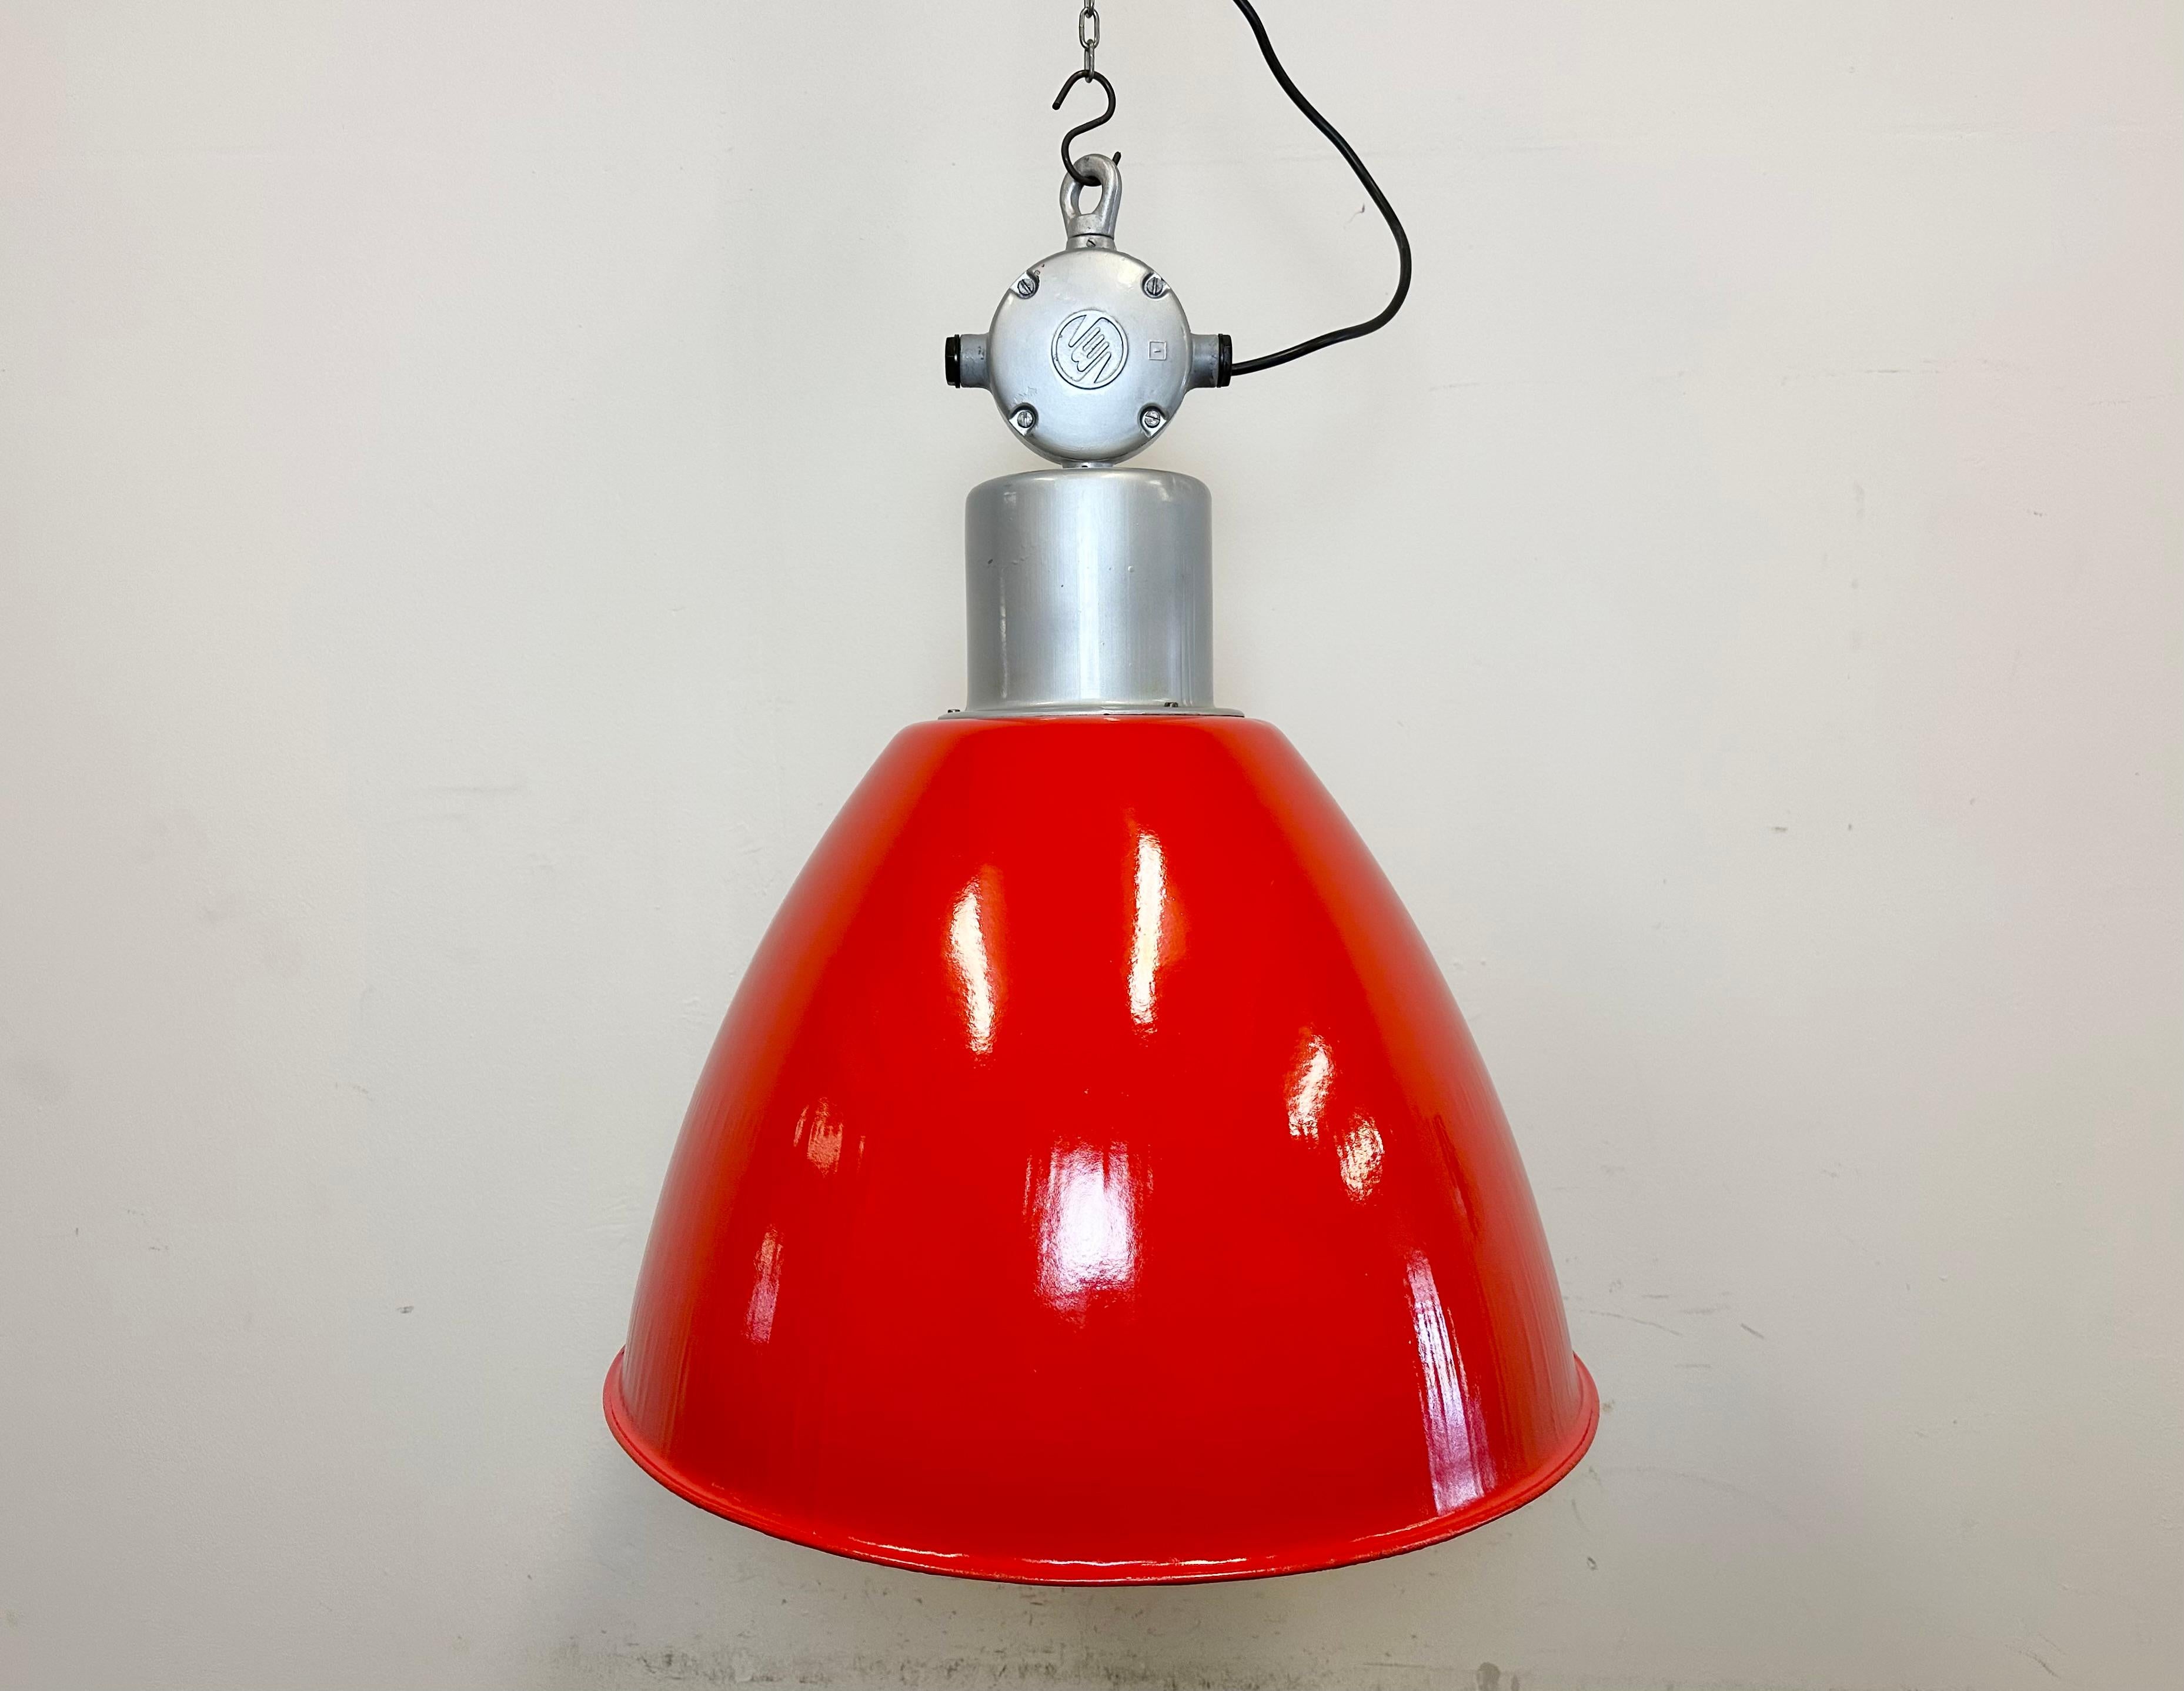 This Industrial pendant light was designed in the 1960s and produced by Elektrosvit in the former Czechoslovakia. It features a silver cast aluminium top, a newly painted shade on red with an original white enamel interior.
New porcelain socket